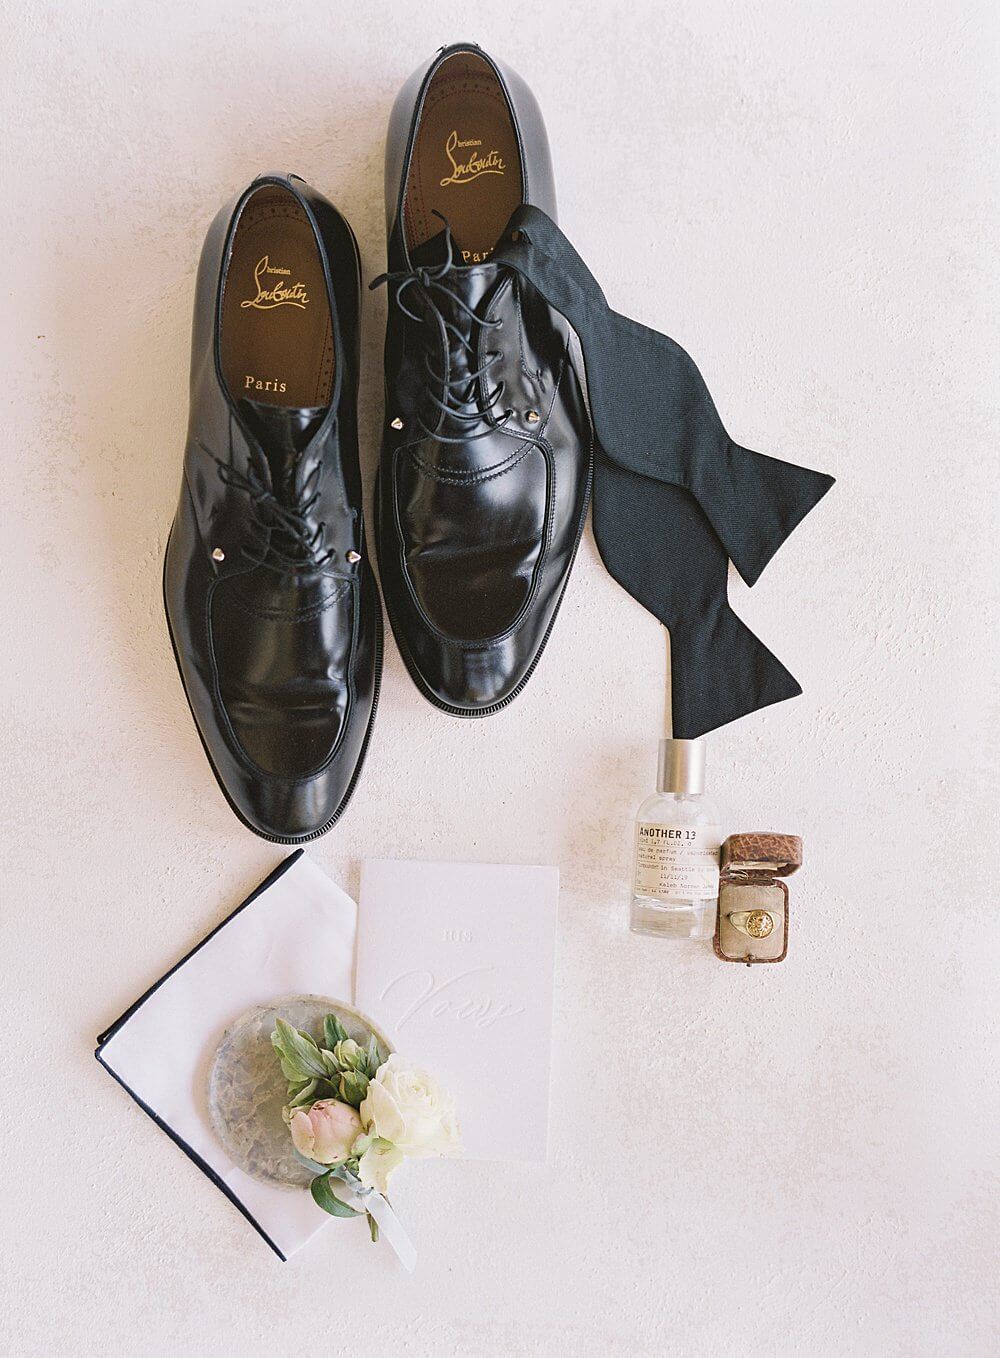 Loubouton grooms shoes with details for cal-a-vie wedding - Jacqueline Benét Photography